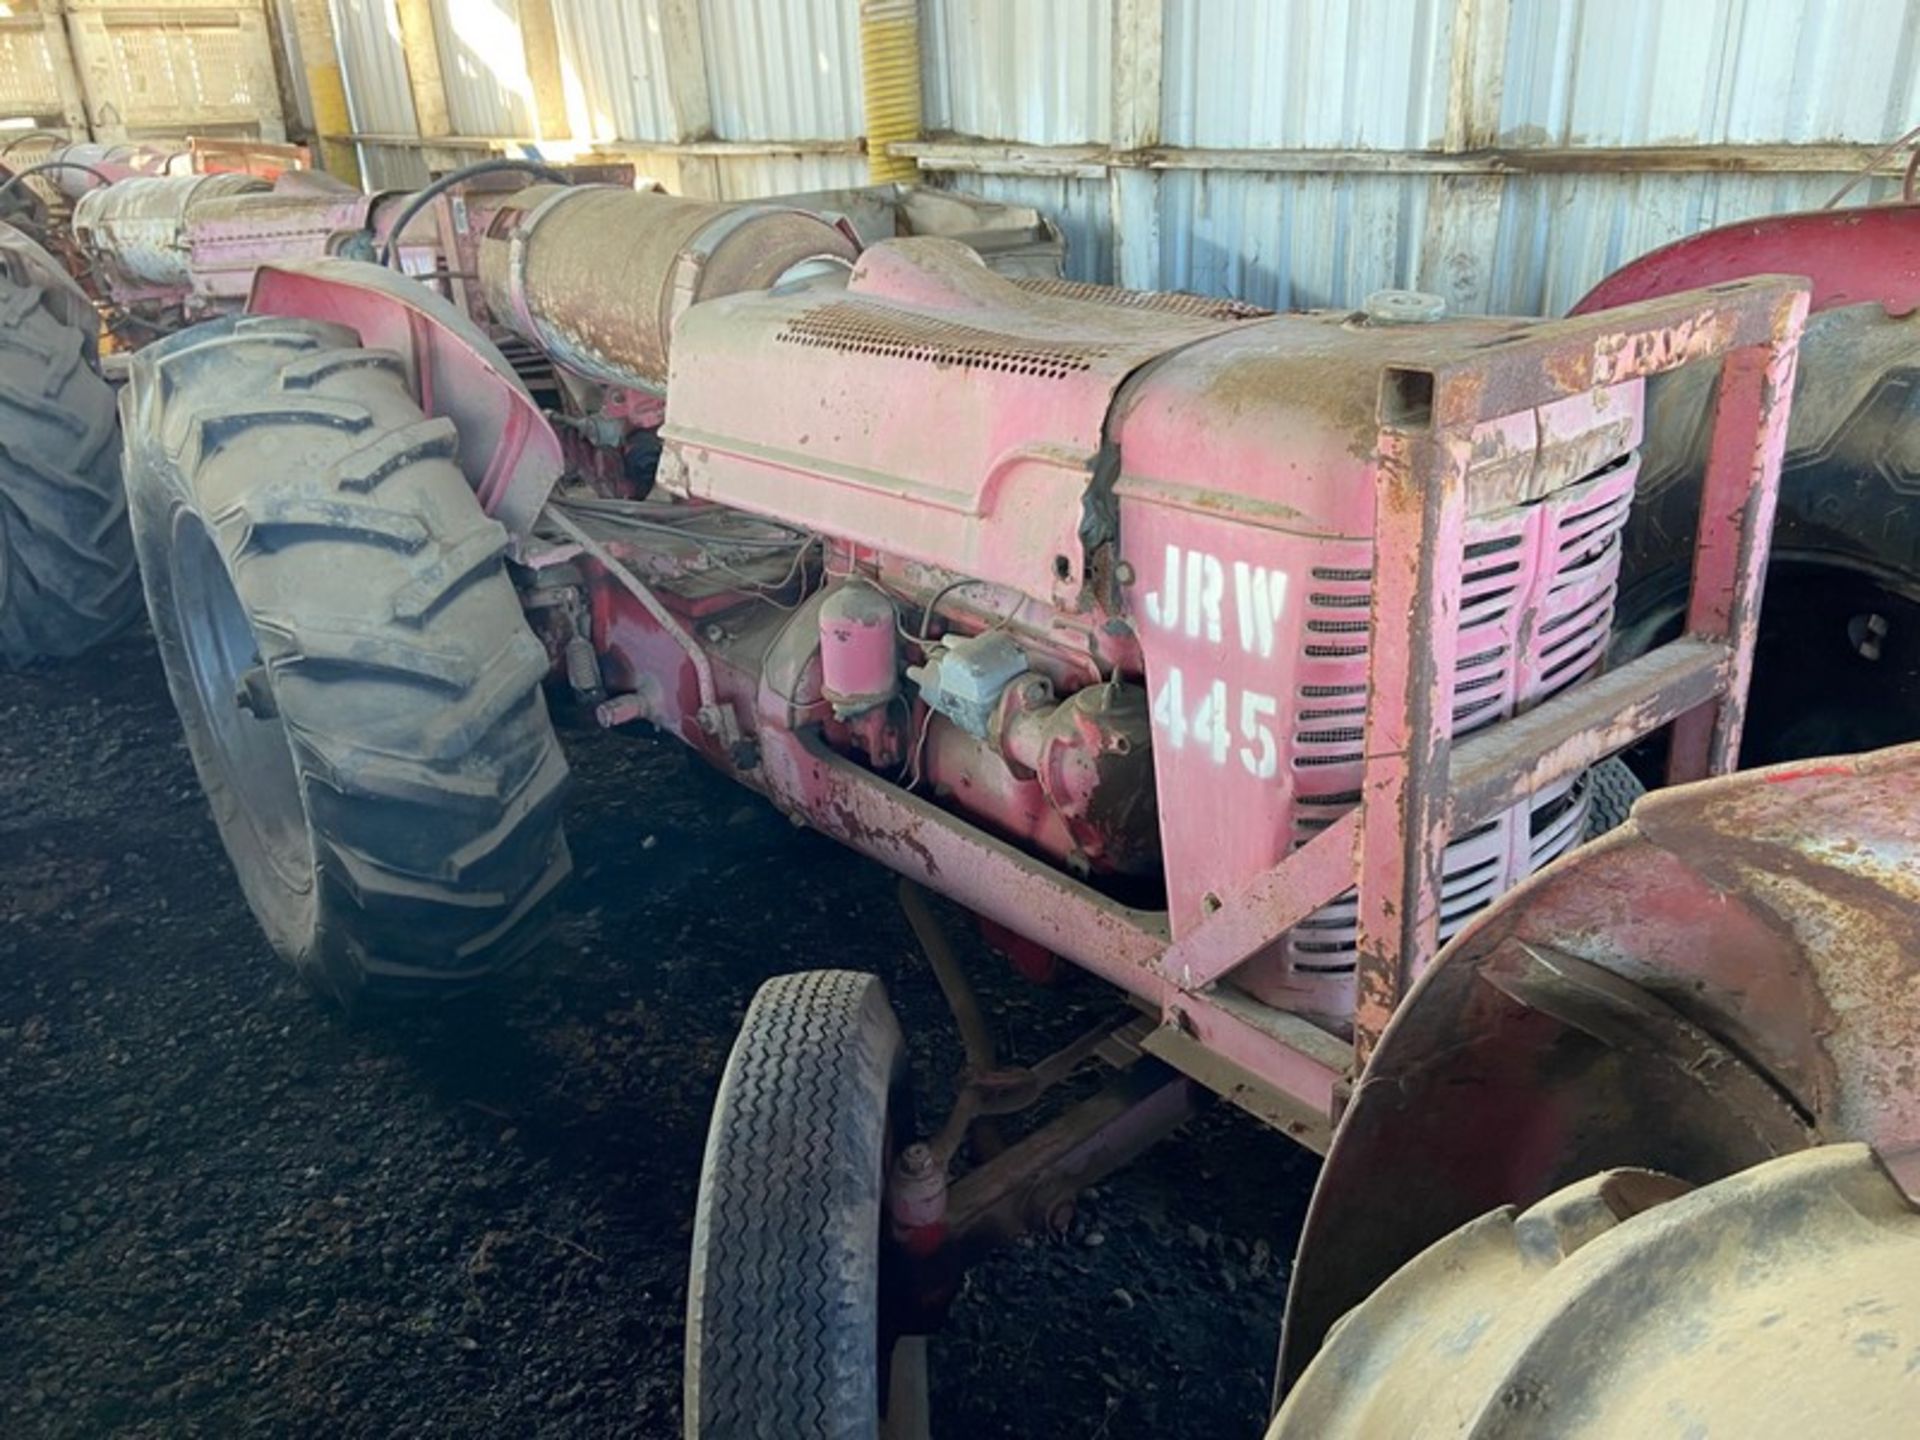 JRW Tractor (Unit 445)(LOCATED IN ATWATER, CA)